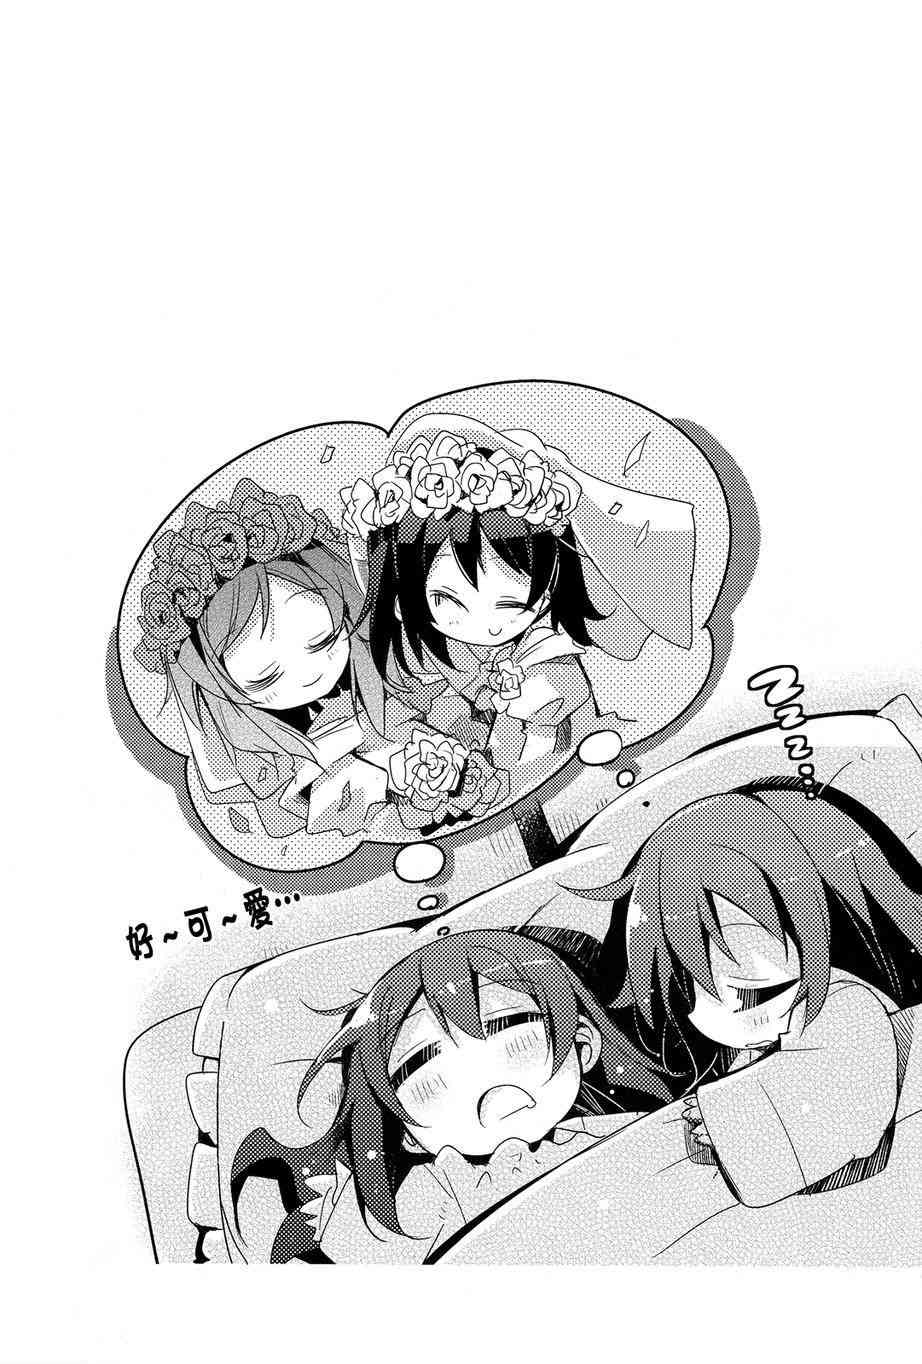 LoveLive - happy family plan - 2